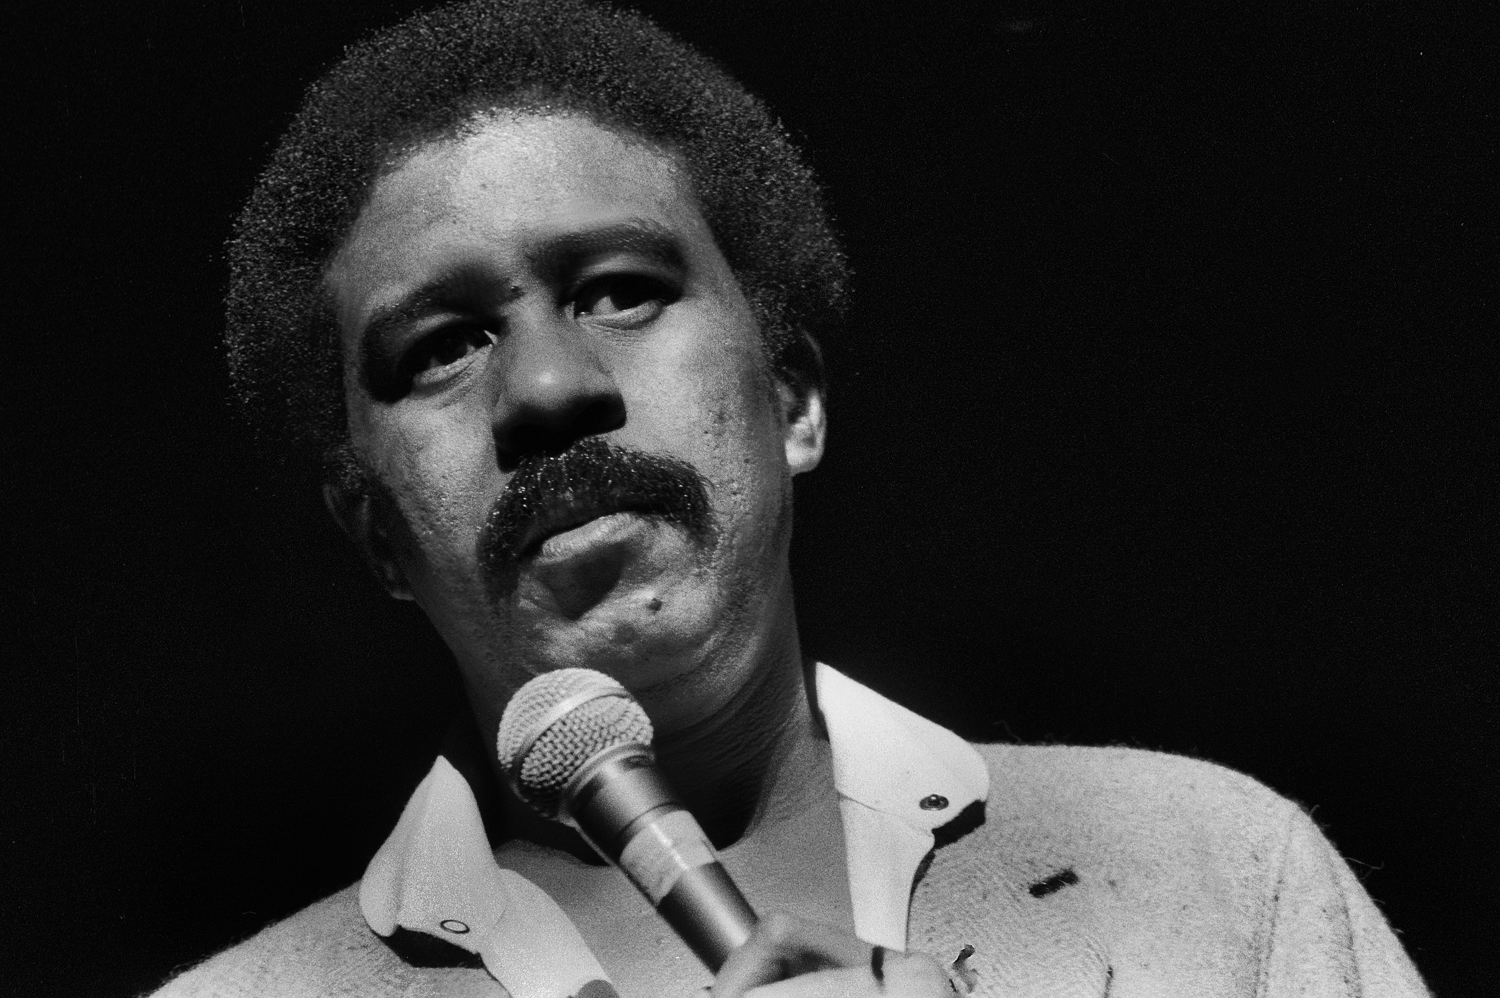 Richard Pryor performing on stage at the Auditorium Theater in Chicago, Illinois, July 28, 1978.